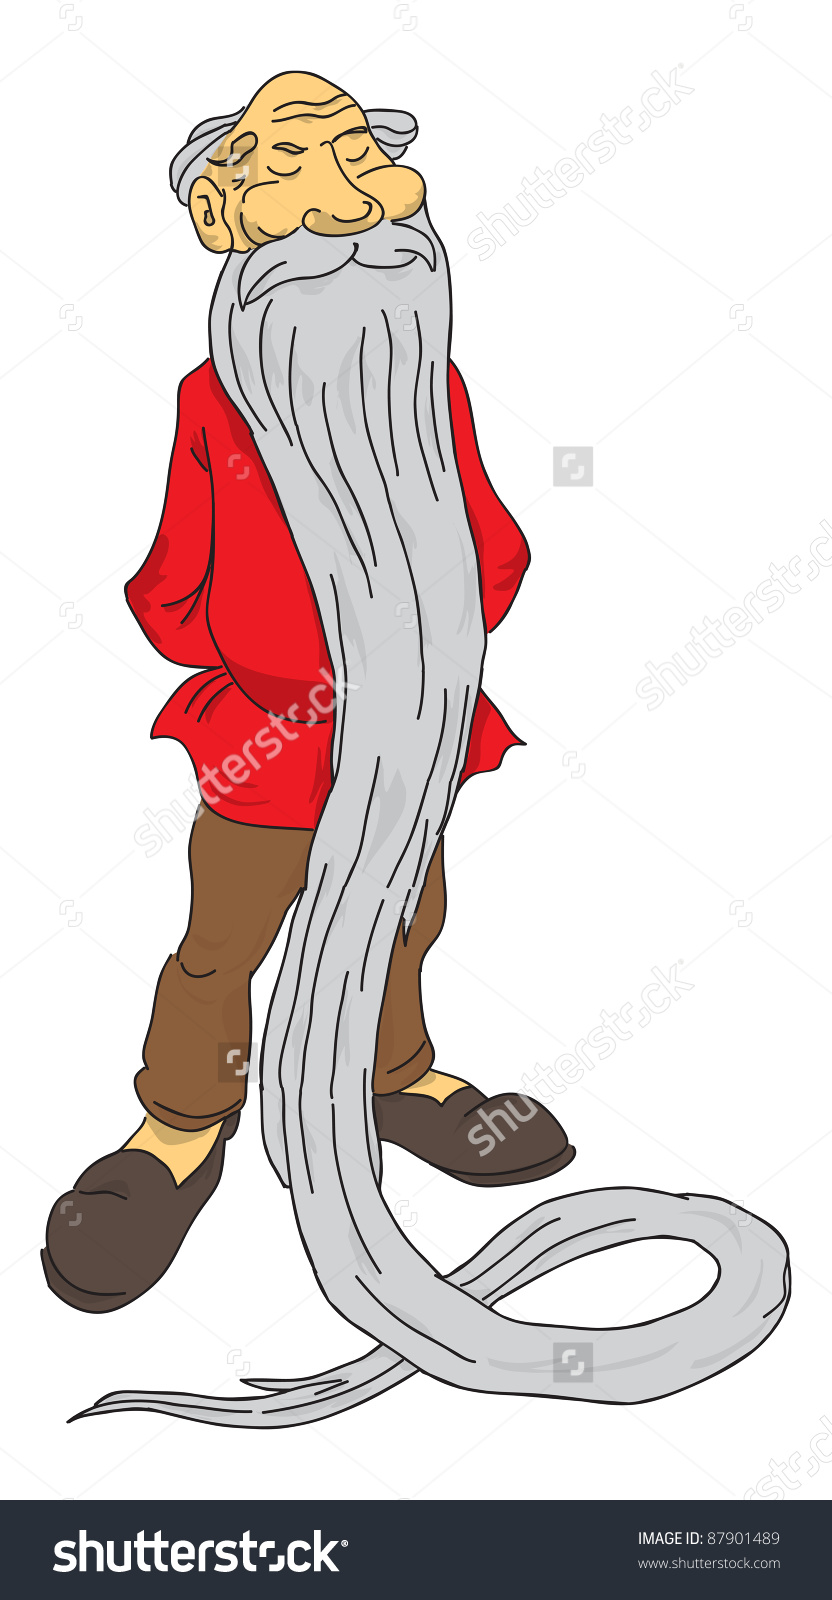 Beard clipart illustration. Old man with 